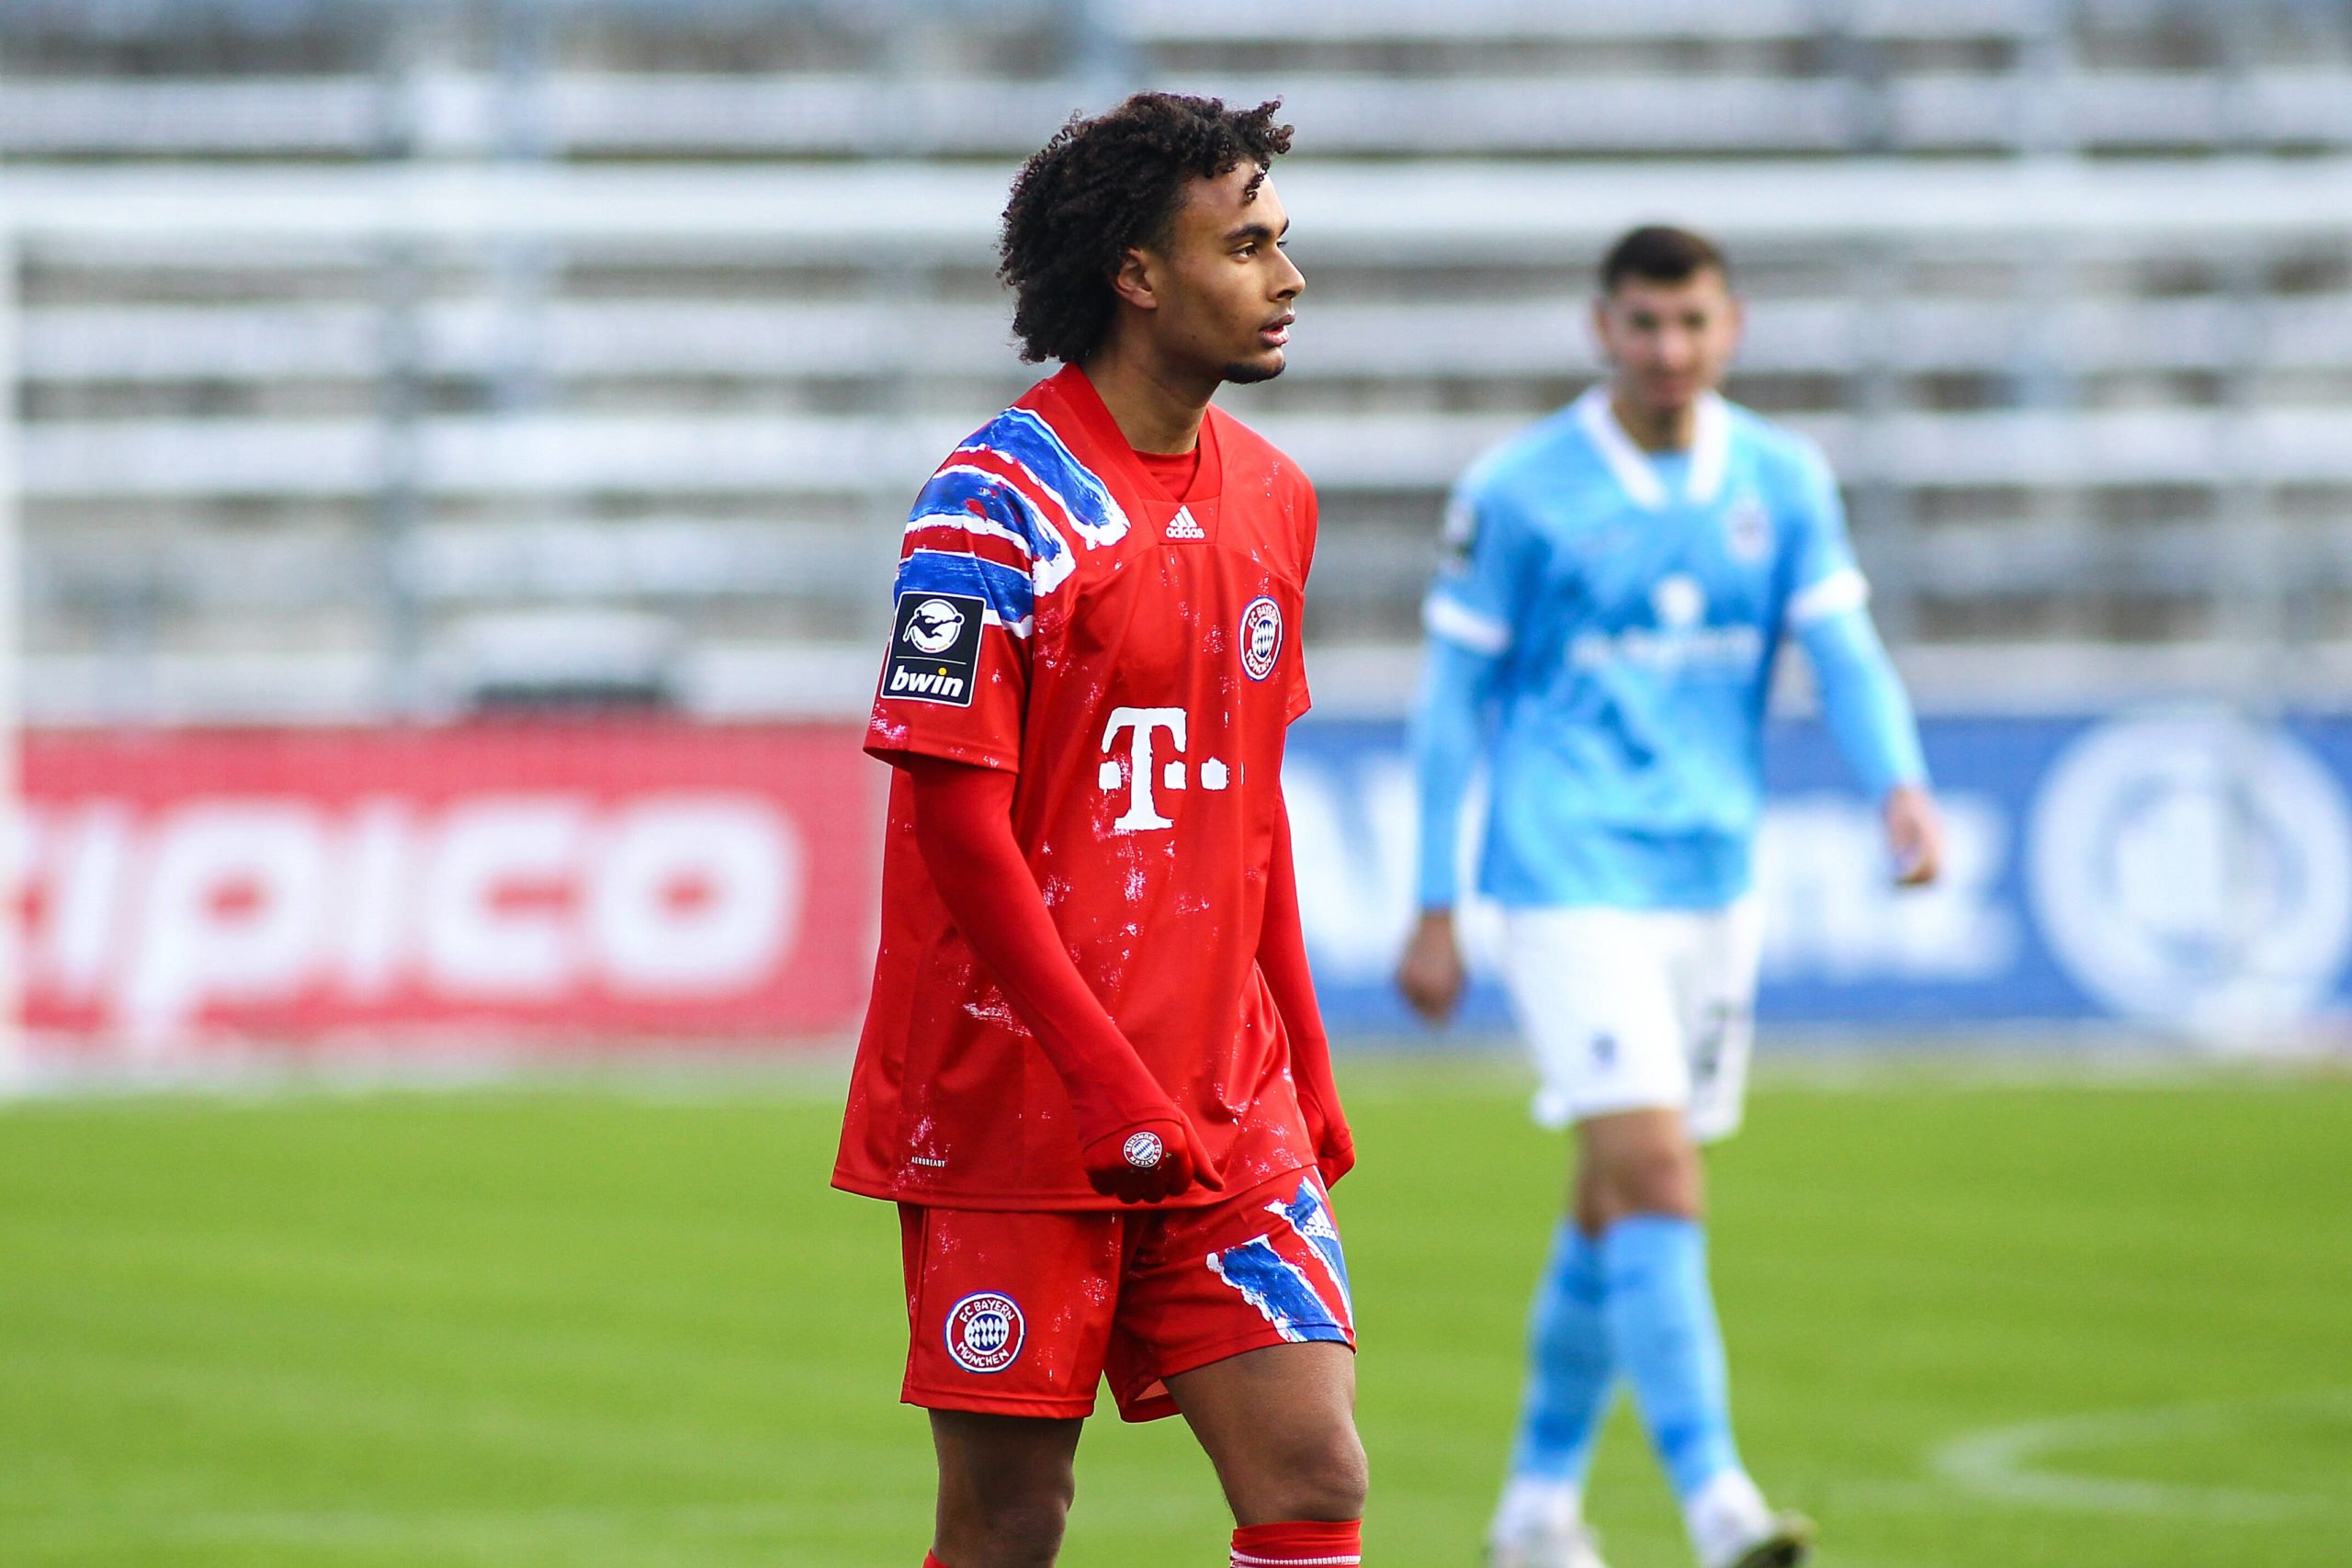 Everton among several clubs hoping to land Zirkzee who is seen in the photo